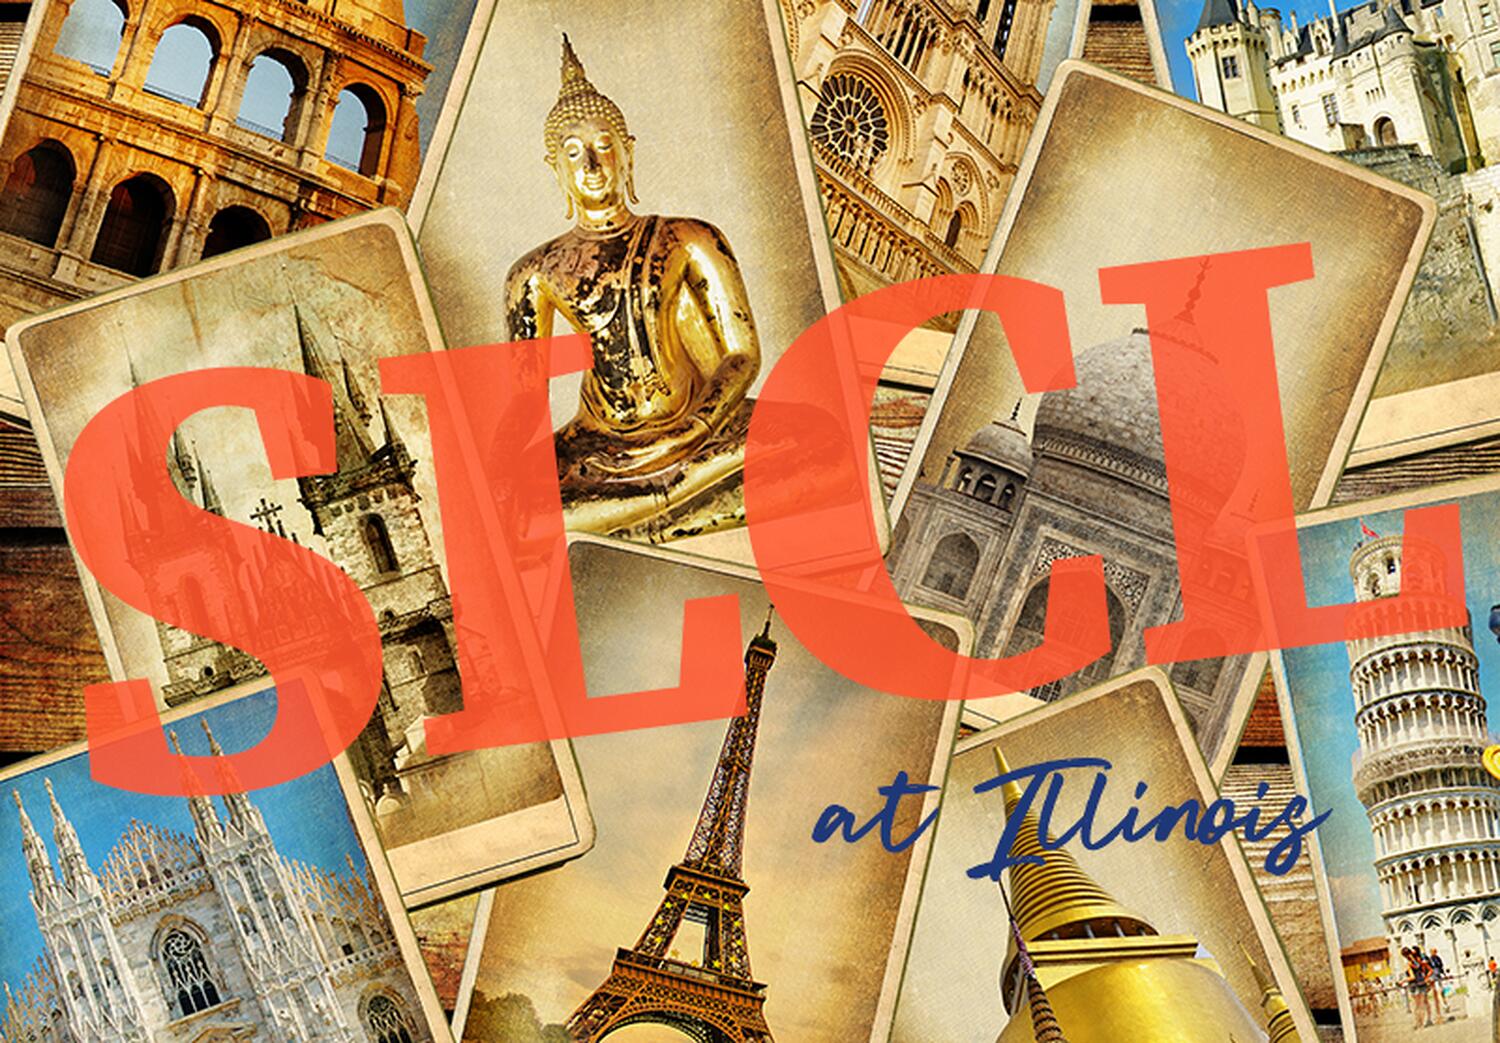 Postcards from abroad with the text, "SLCL at Illinois"